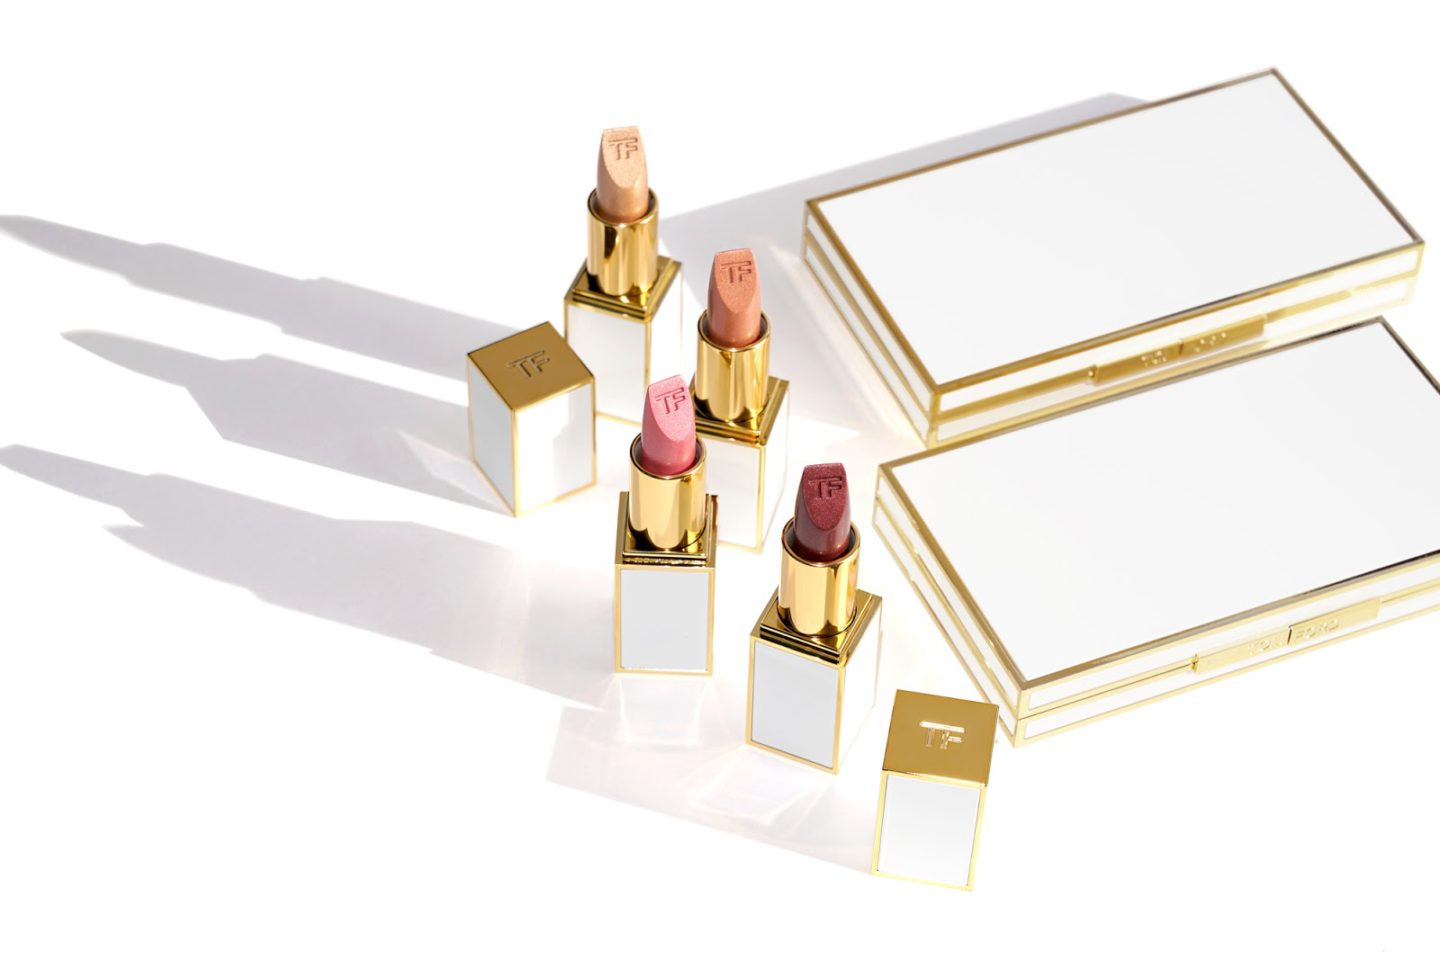 Tom Ford Winter Soleil 2016 - The Beauty Look Book